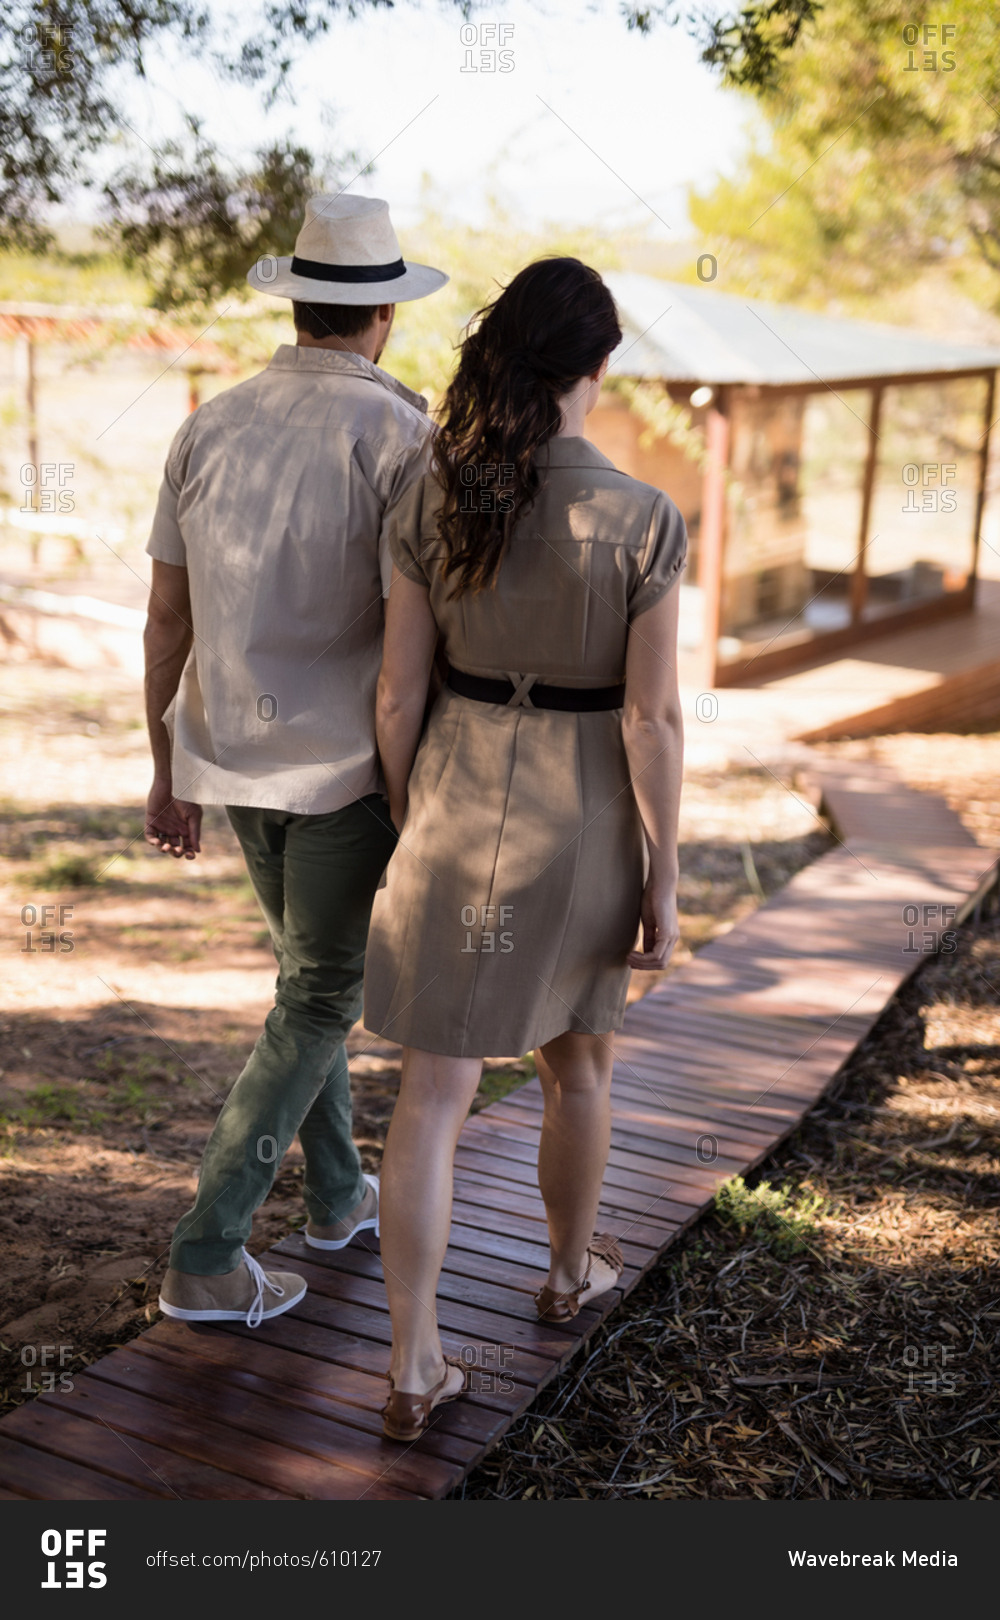 Rear view of couple walking on wooden deck during safari vacation